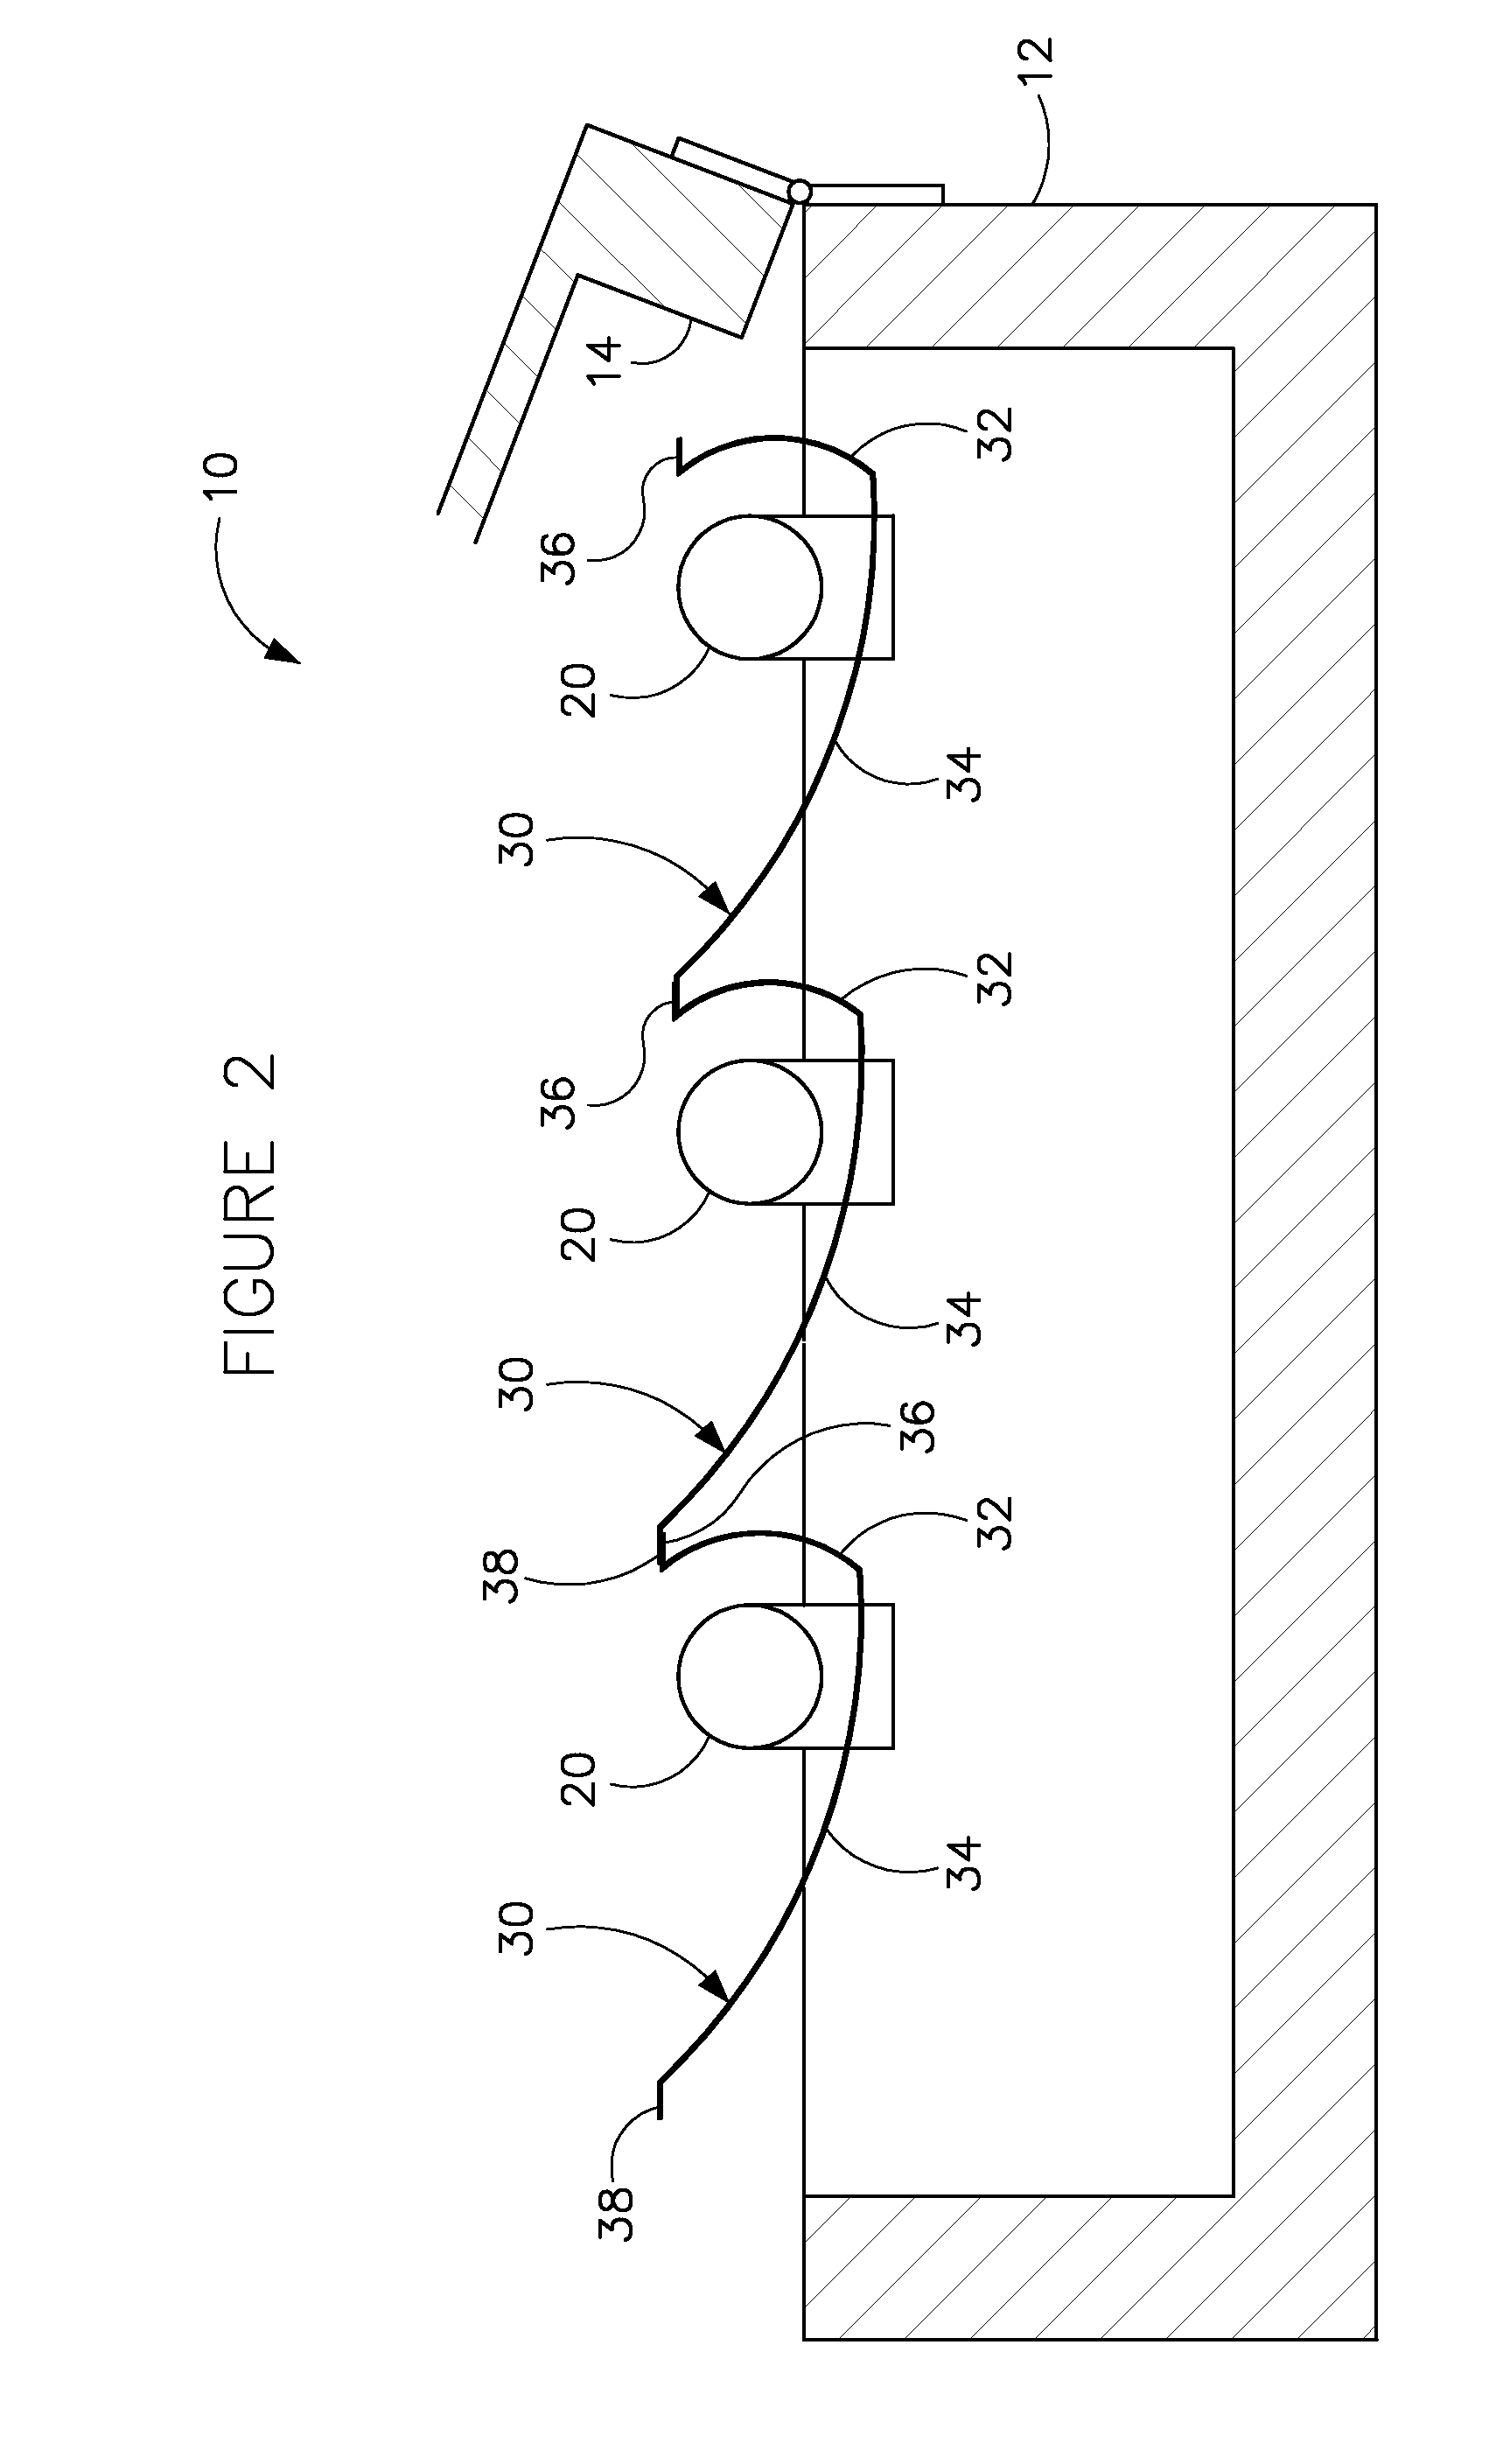 Lighting device with throw forward reflector